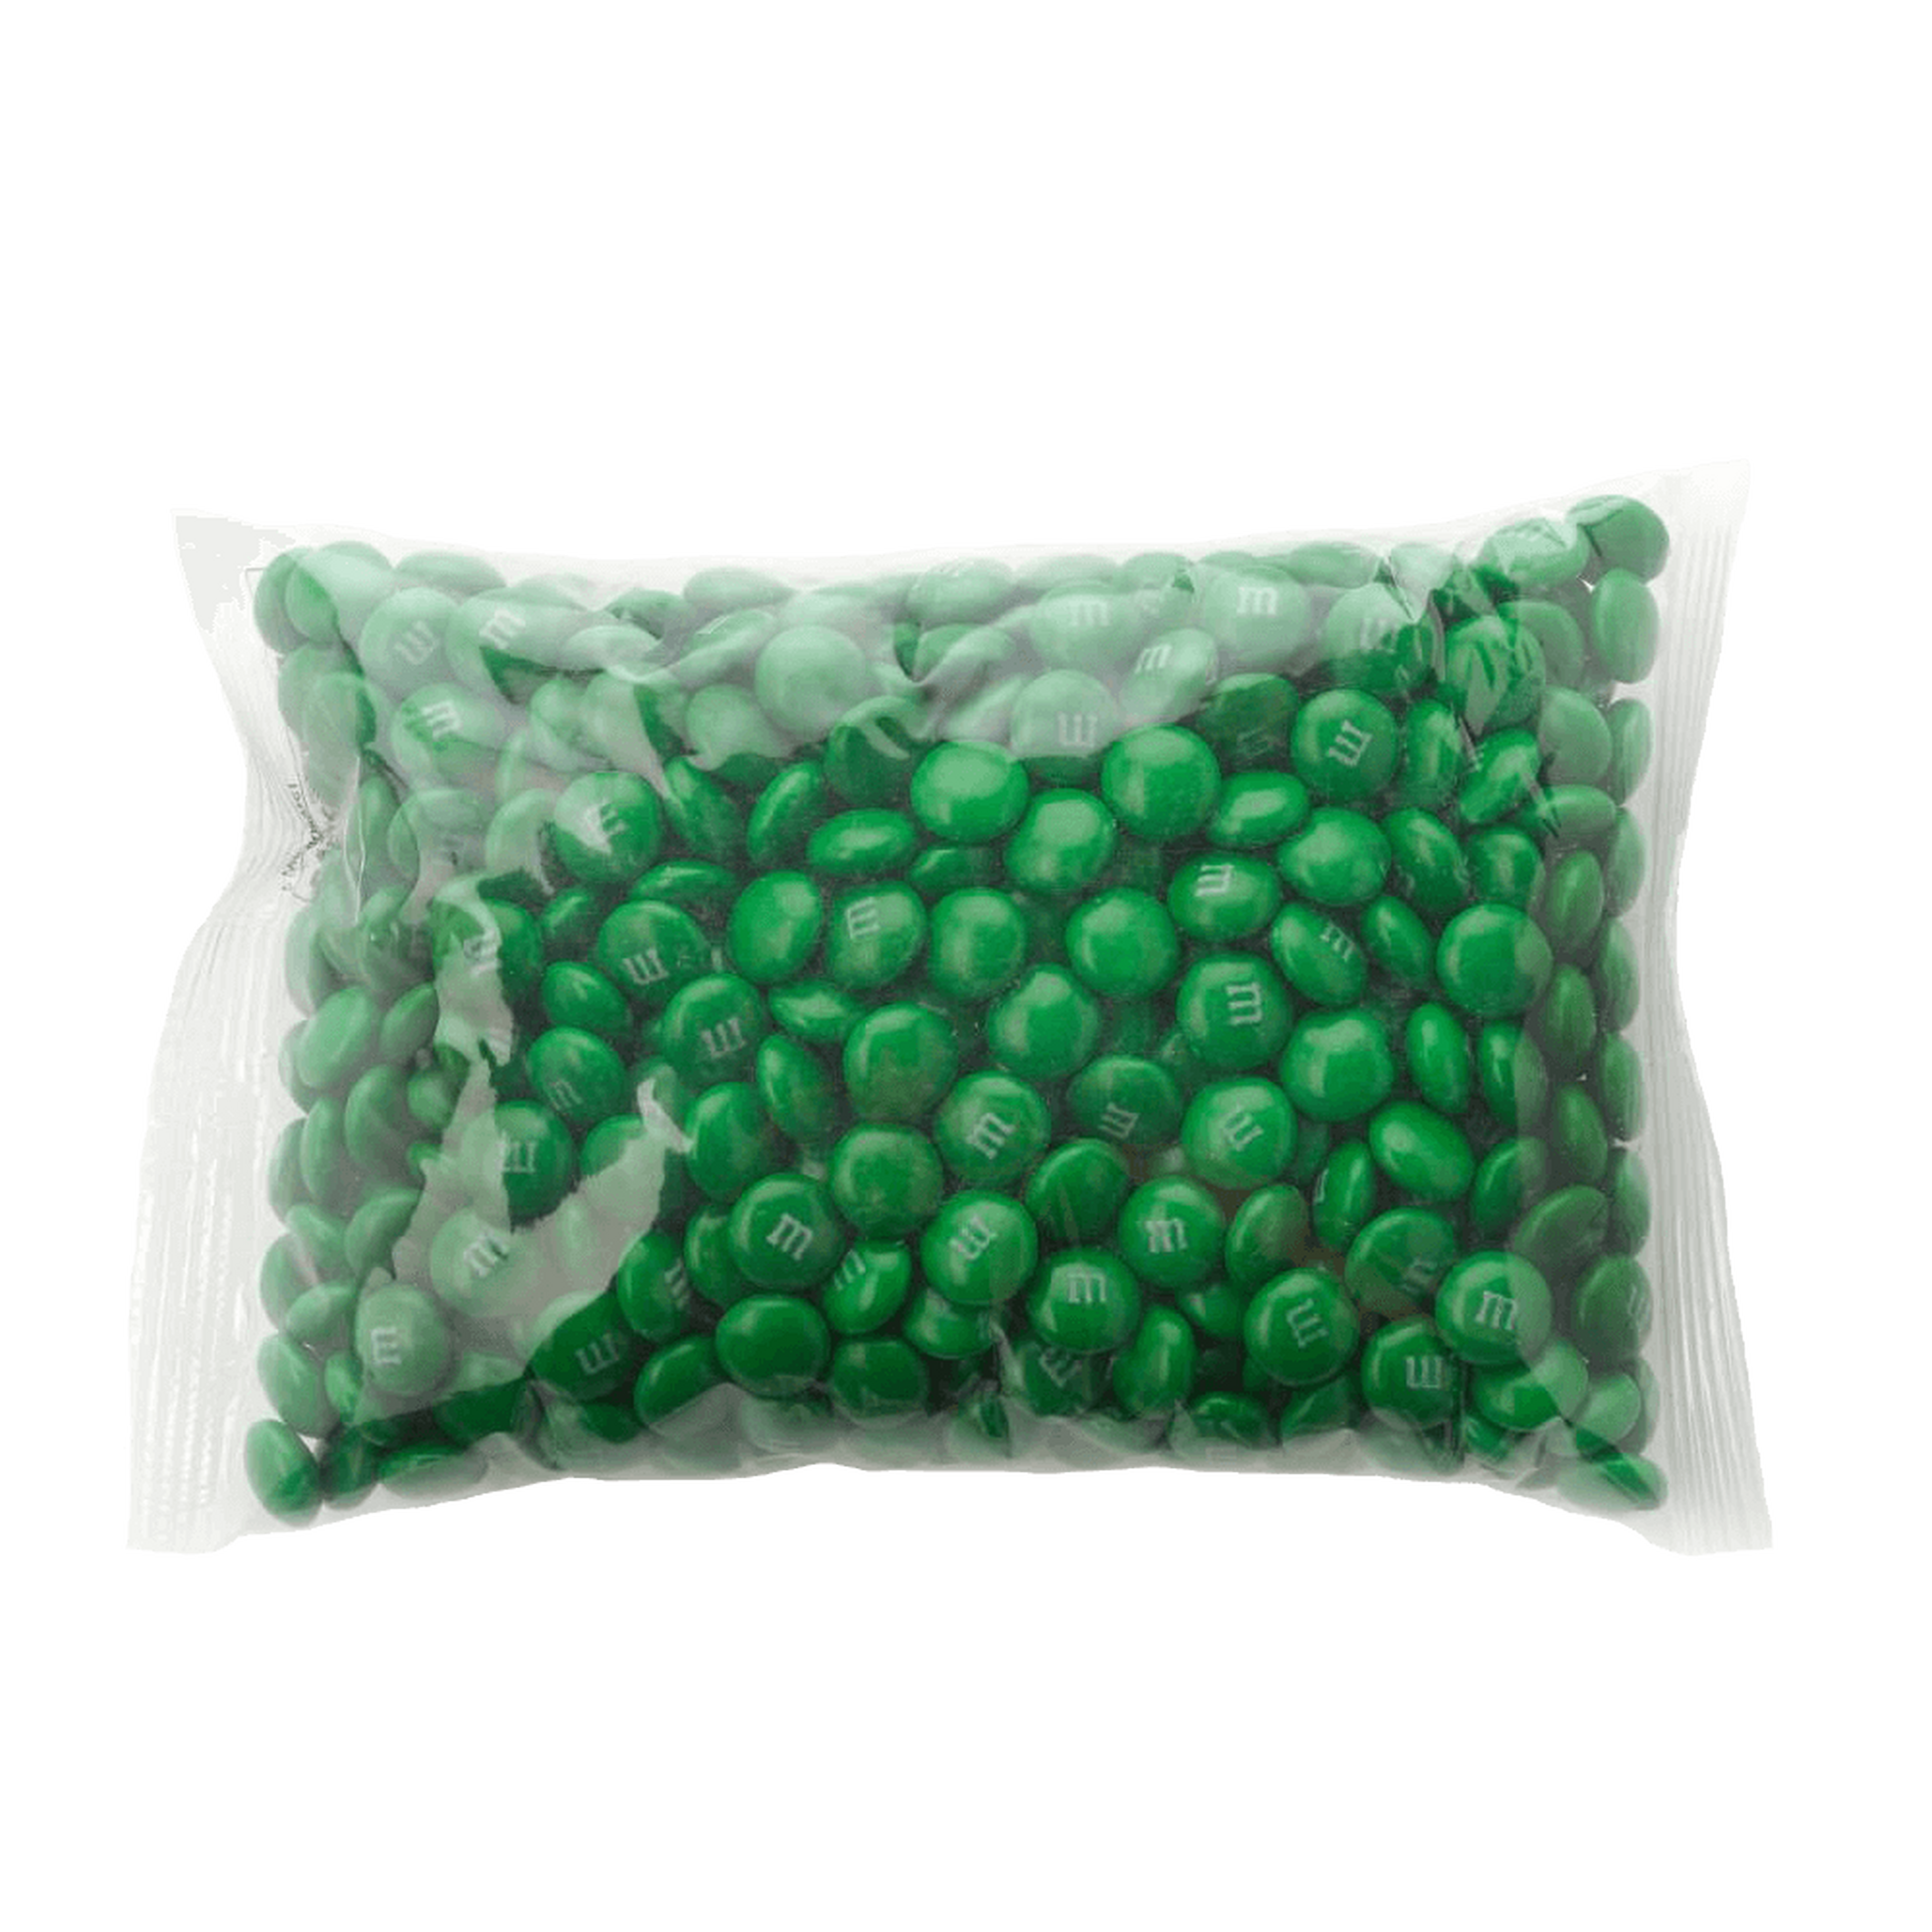  M&M'S Pre-Designed St Patricks Day Milk Chocolate Candy - 2lbs  of Bulk Candy in Resealable Pack for the Perfect Green and White Party, St  Patrick's Day Gift and Sweet Stuff for